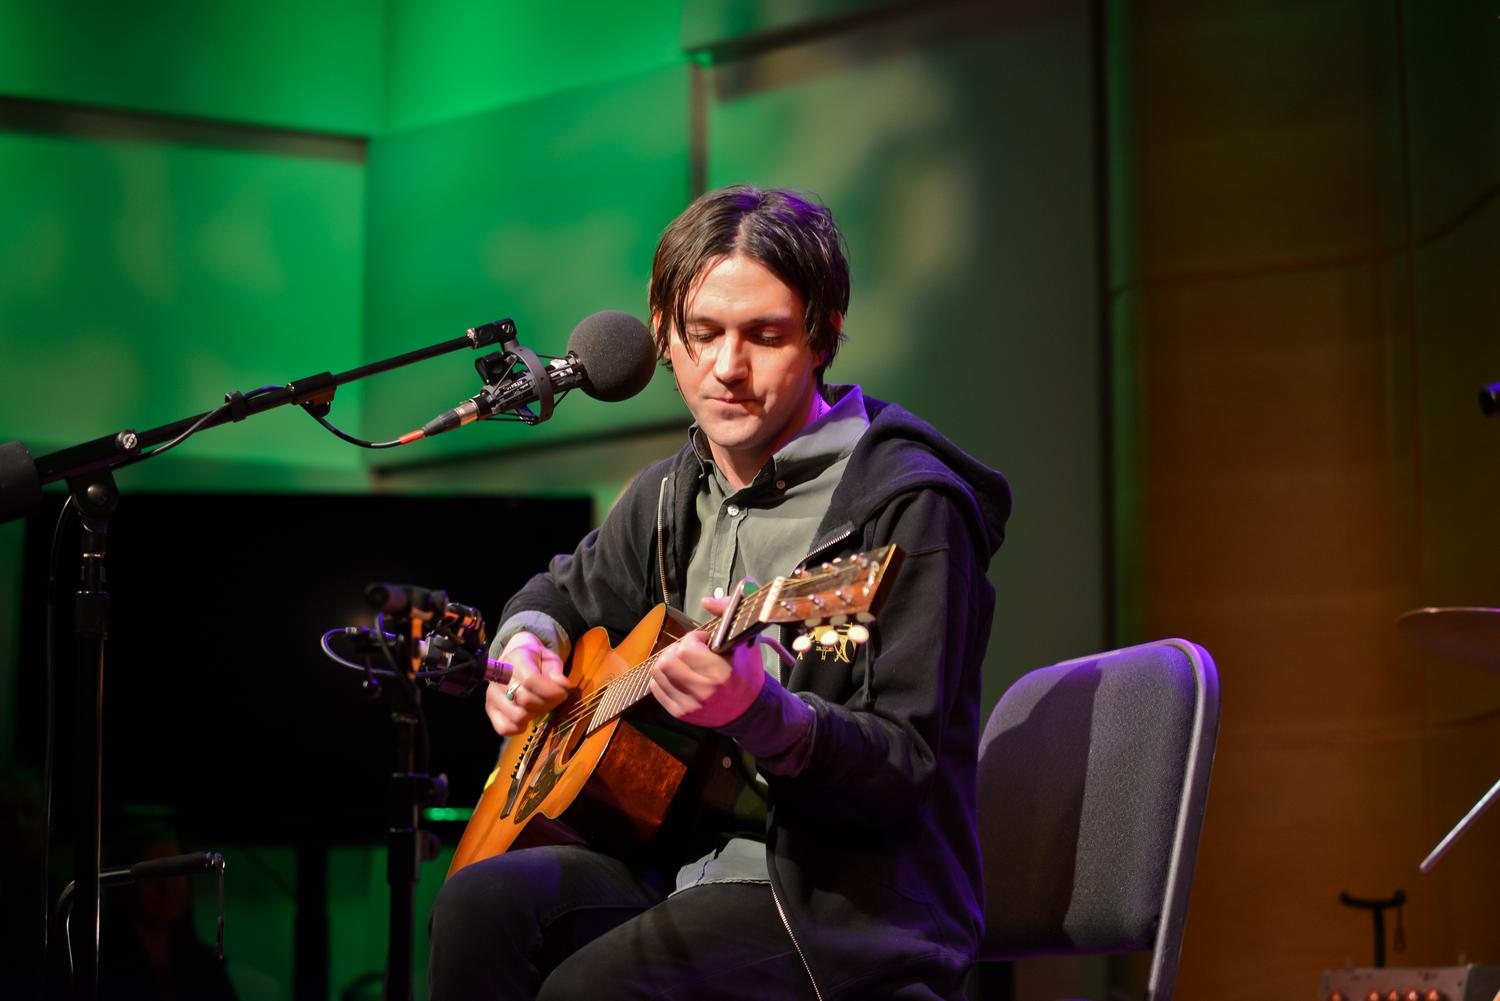 Soundcheck’s Gigstock with Conor Oberst, James Vincent McMorrow